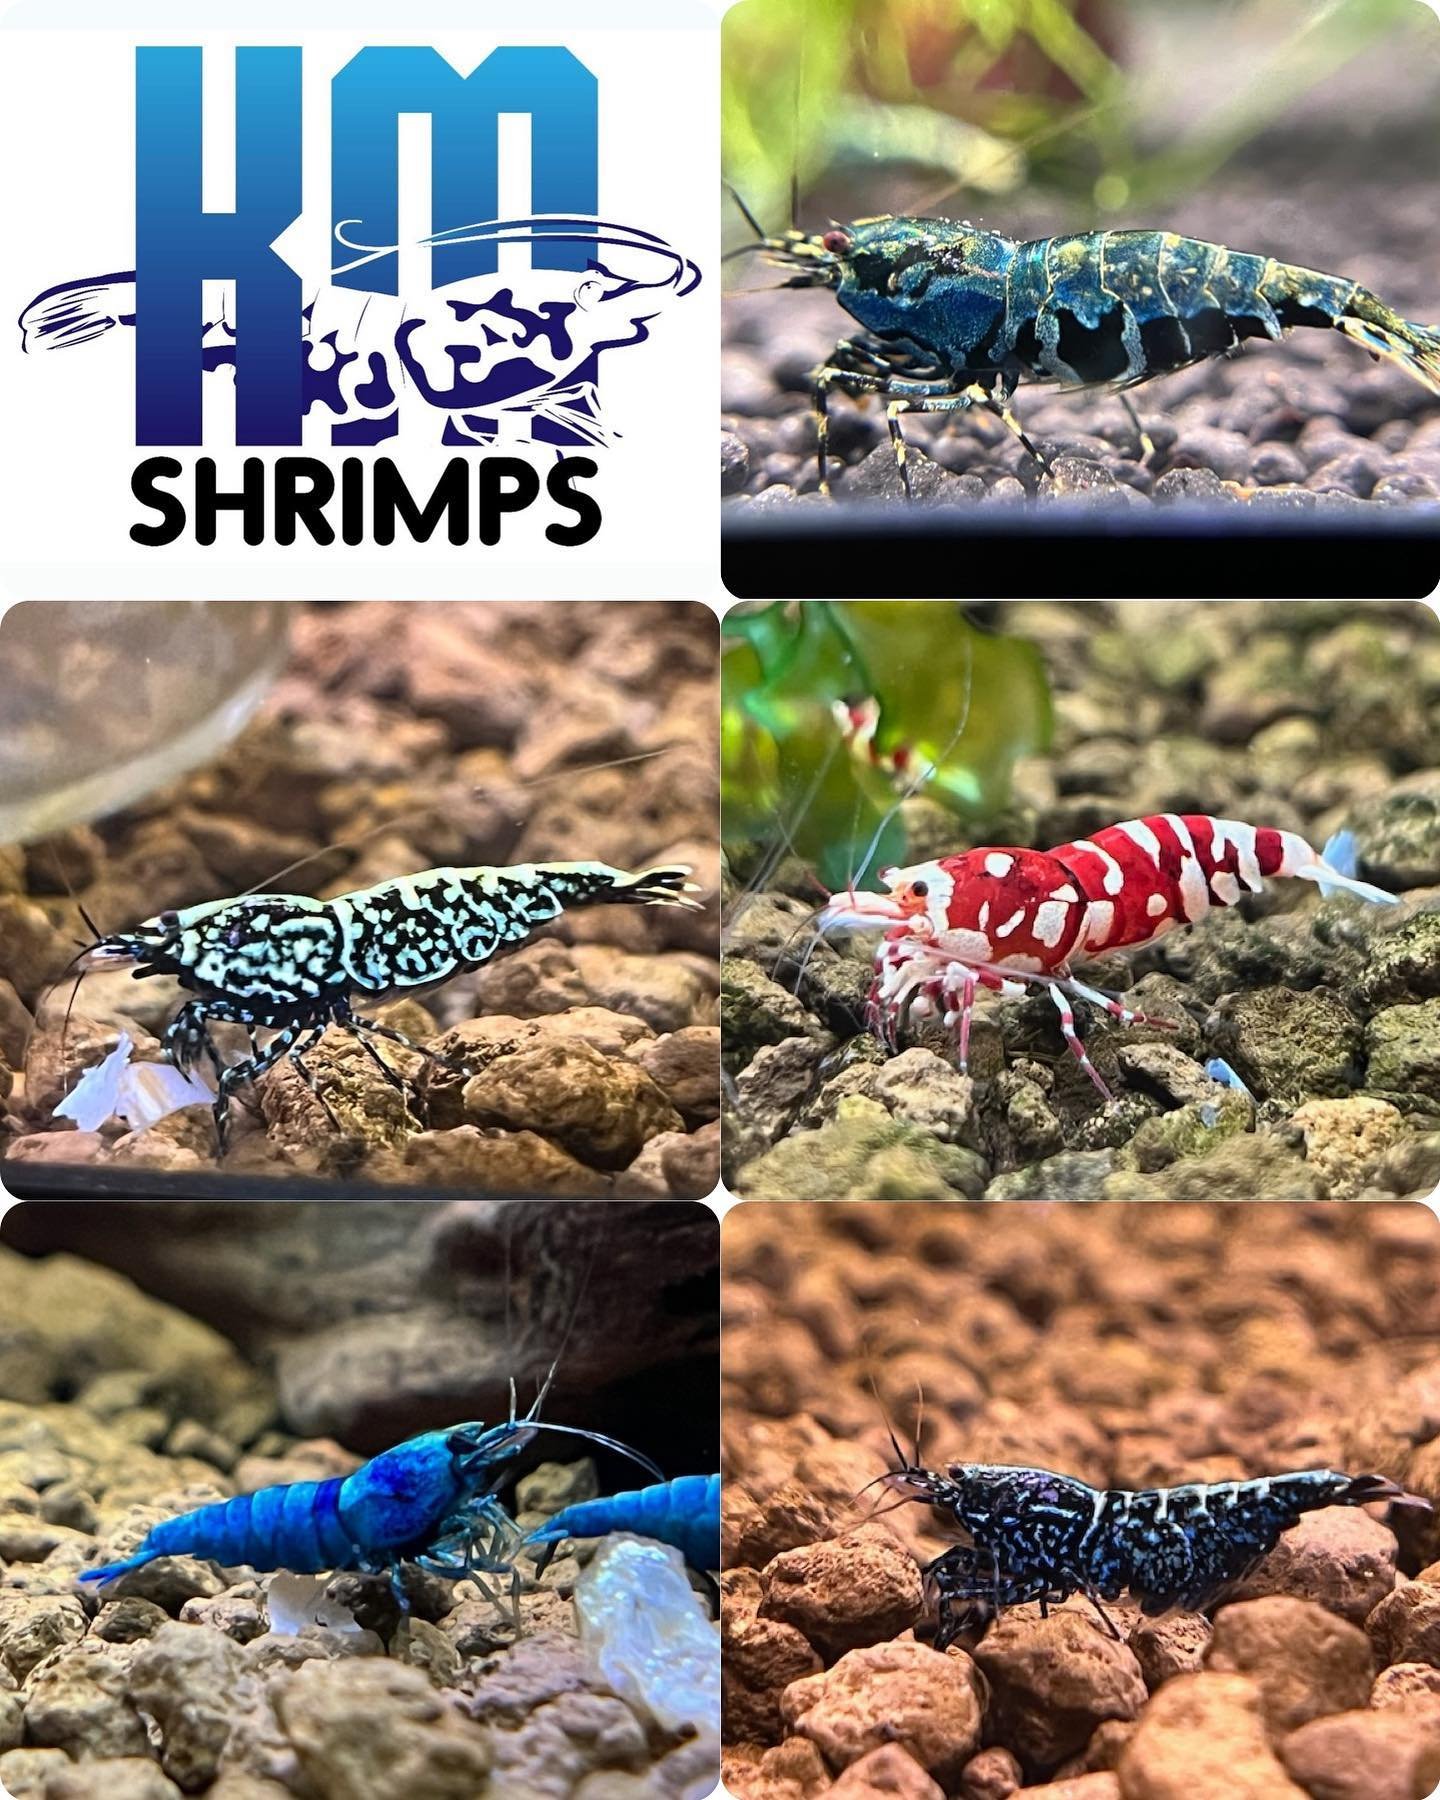 @kmshrimps will be joining us on June 2nd! 

KMShrimps began with a small purchase of cherry shrimp that turned an aquascape into an addiction. They fell in love with the active decoration that make any aquarium pop!

They will be offering a variety 